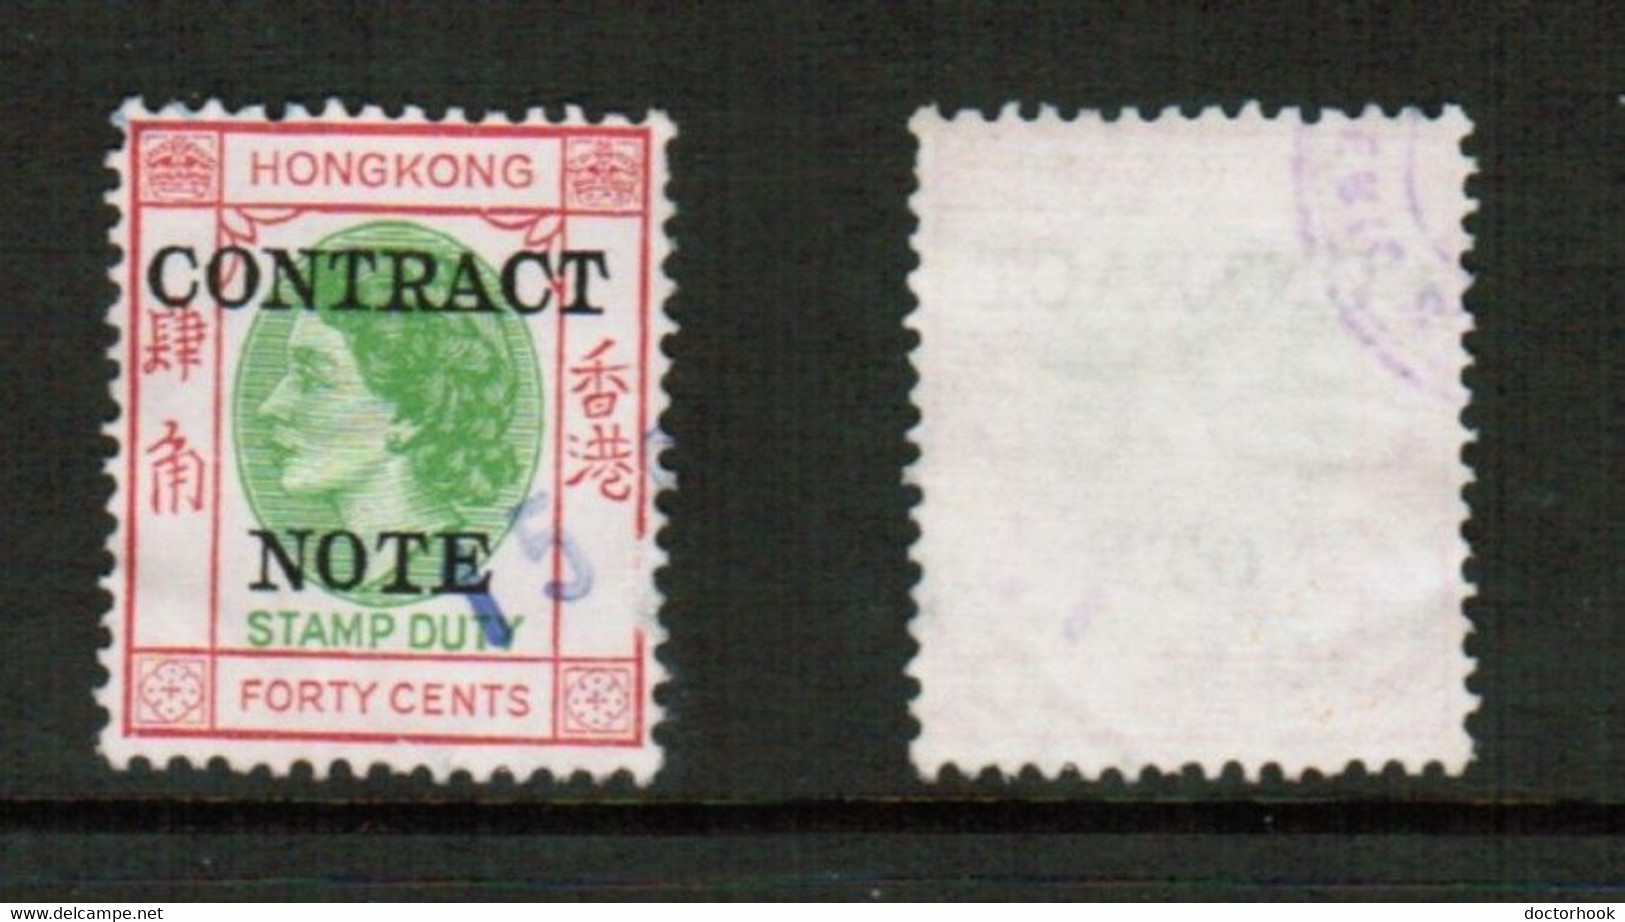 HONG KONG   40 CENT CONTRACT NOTE FISCAL USED THIN (CONDITION AS PER SCAN) (Stamp Scan # 828-10) - Postal Fiscal Stamps